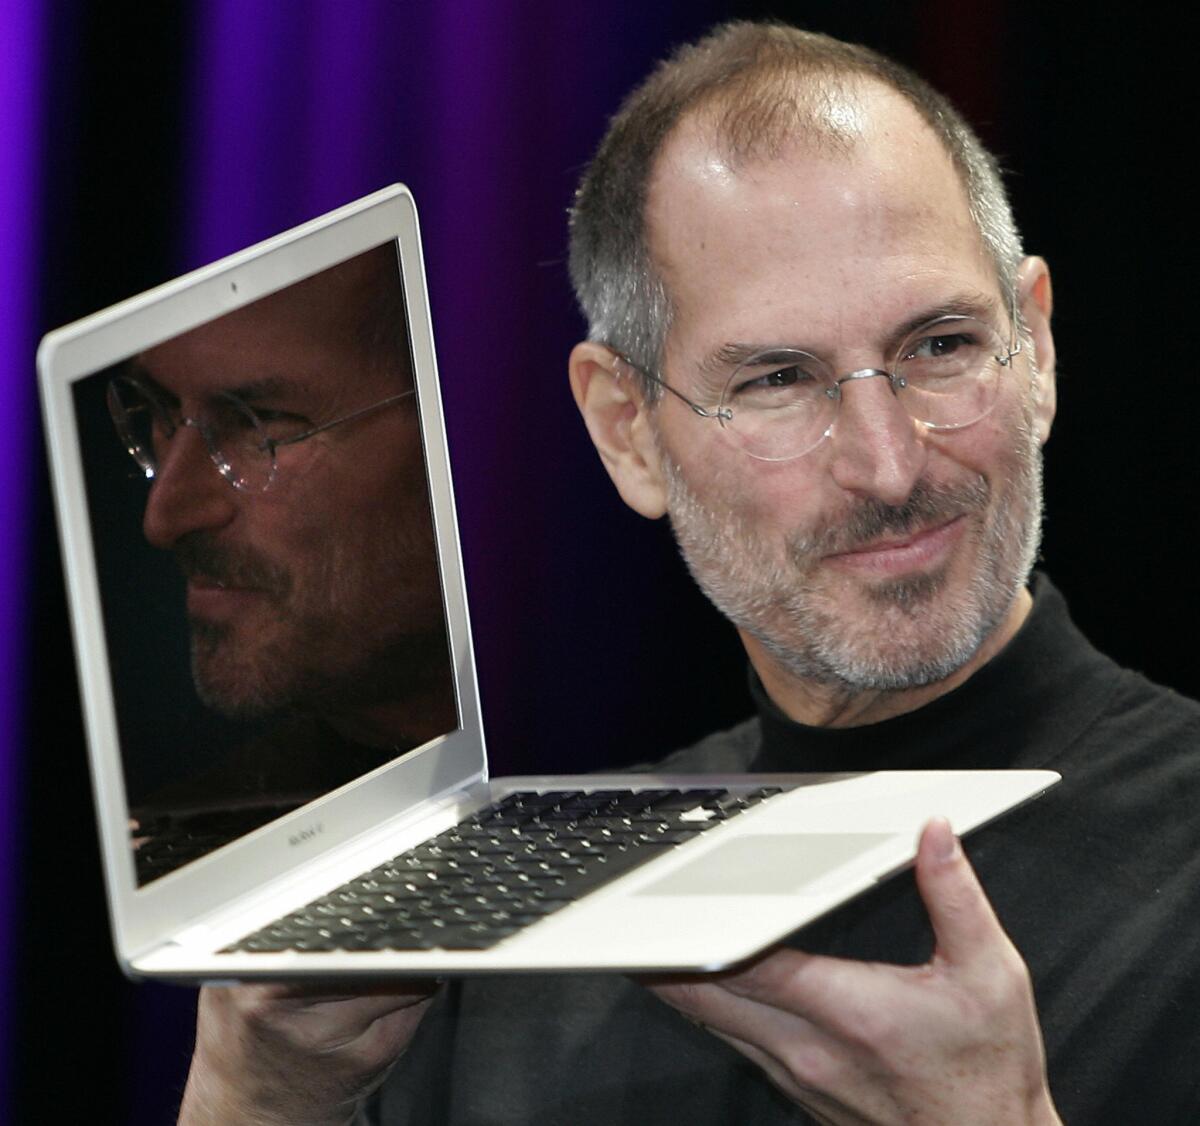 Former Apple Chief Executive Steve Jobs was accused of conspiring with competitors not to poach employees.